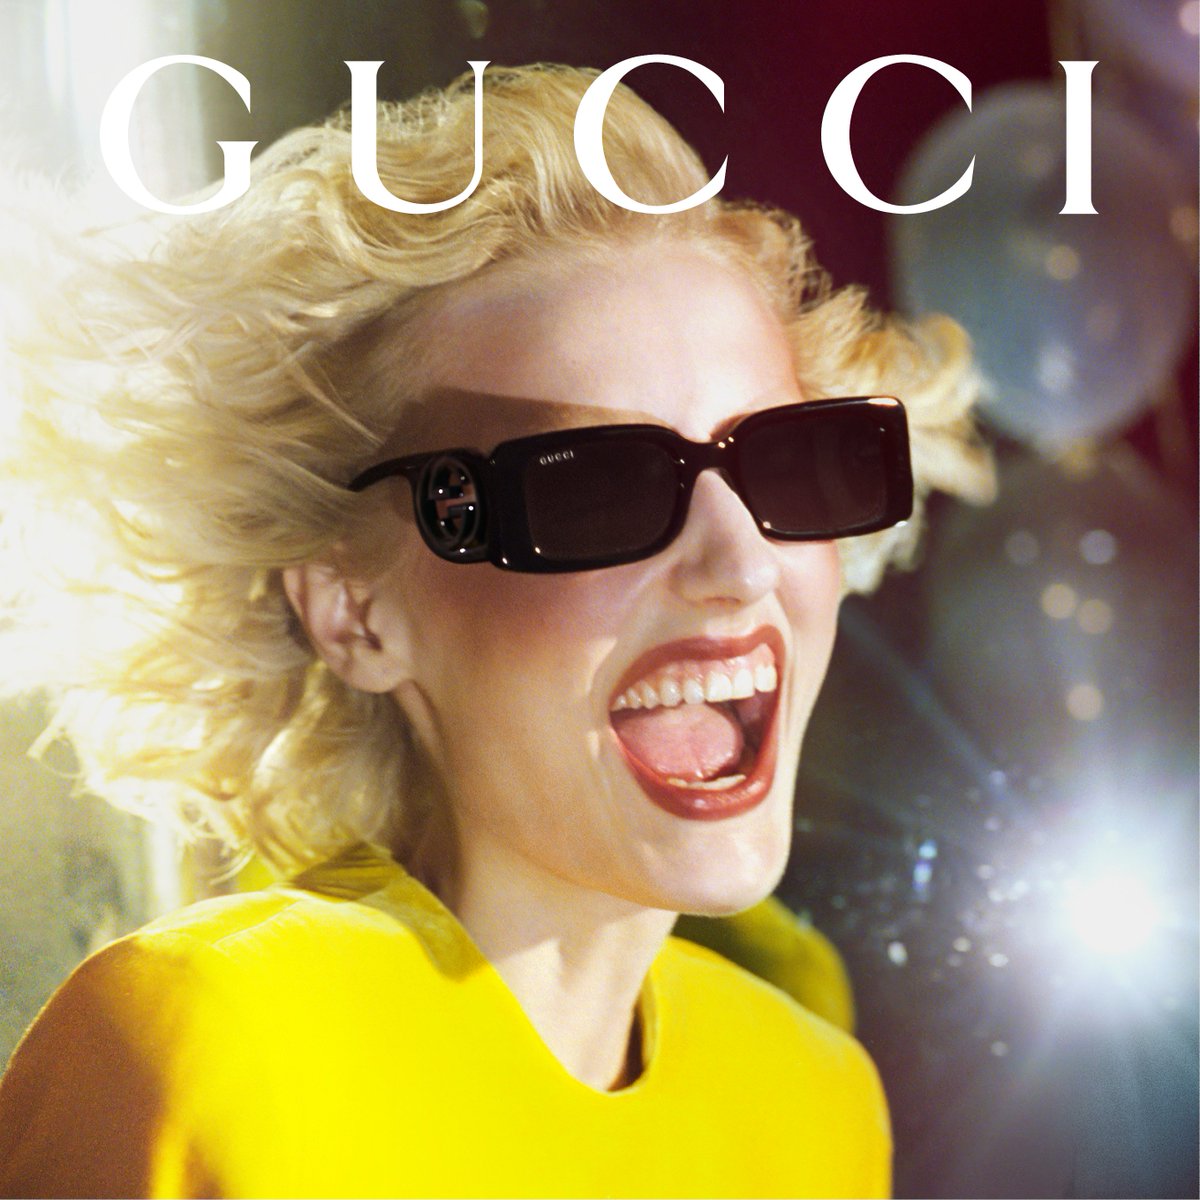 New Spring Collection From @Gucci 
Available at Grand Central Optical NYC. 
grandcentraloptical.com 
212-599-1220
#Keringeyewearusagucci #samedayglasses #gucci #houseofgucci #grandcentraloptical #midtownmanhattan #NYC #samedayglasses